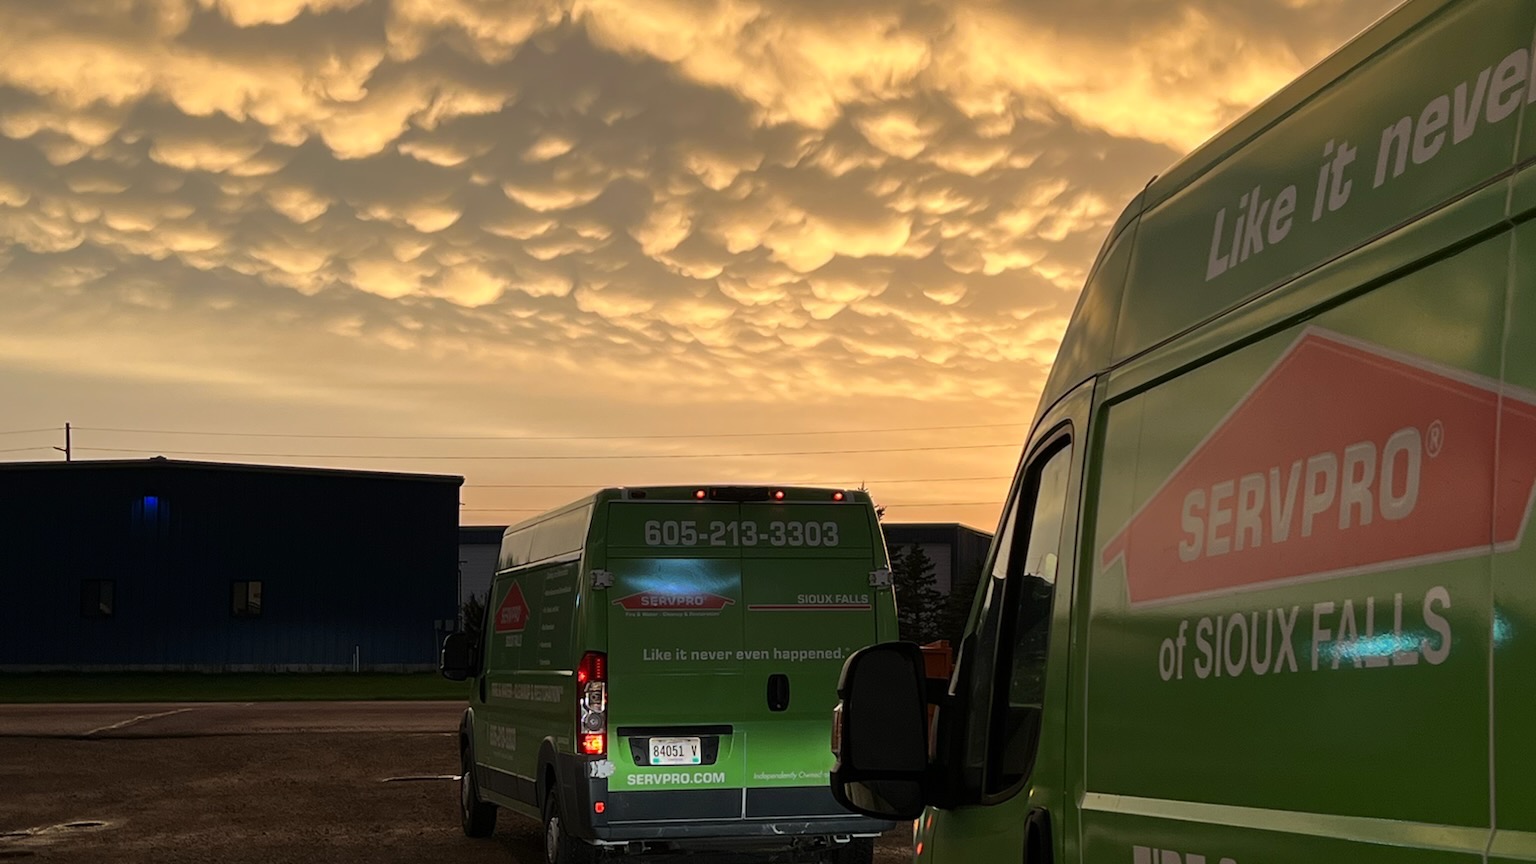 SERVPRO of Sioux Falls vehicles heading out to help with storm damage.